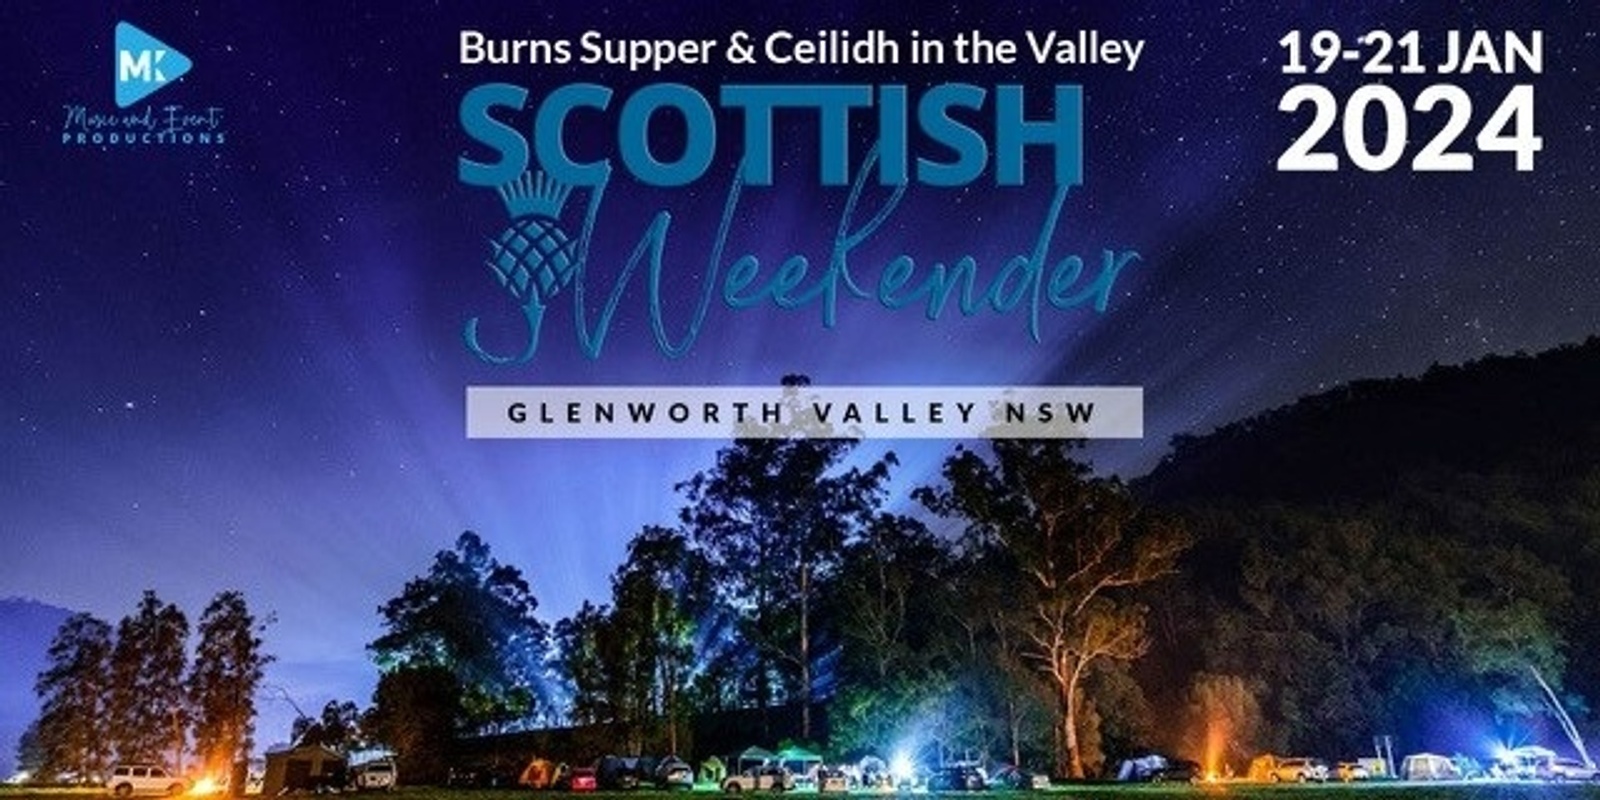 Banner image for Scottish Weekender No2  BURNS SUPPER & CEILIDH IN THE VALLEY